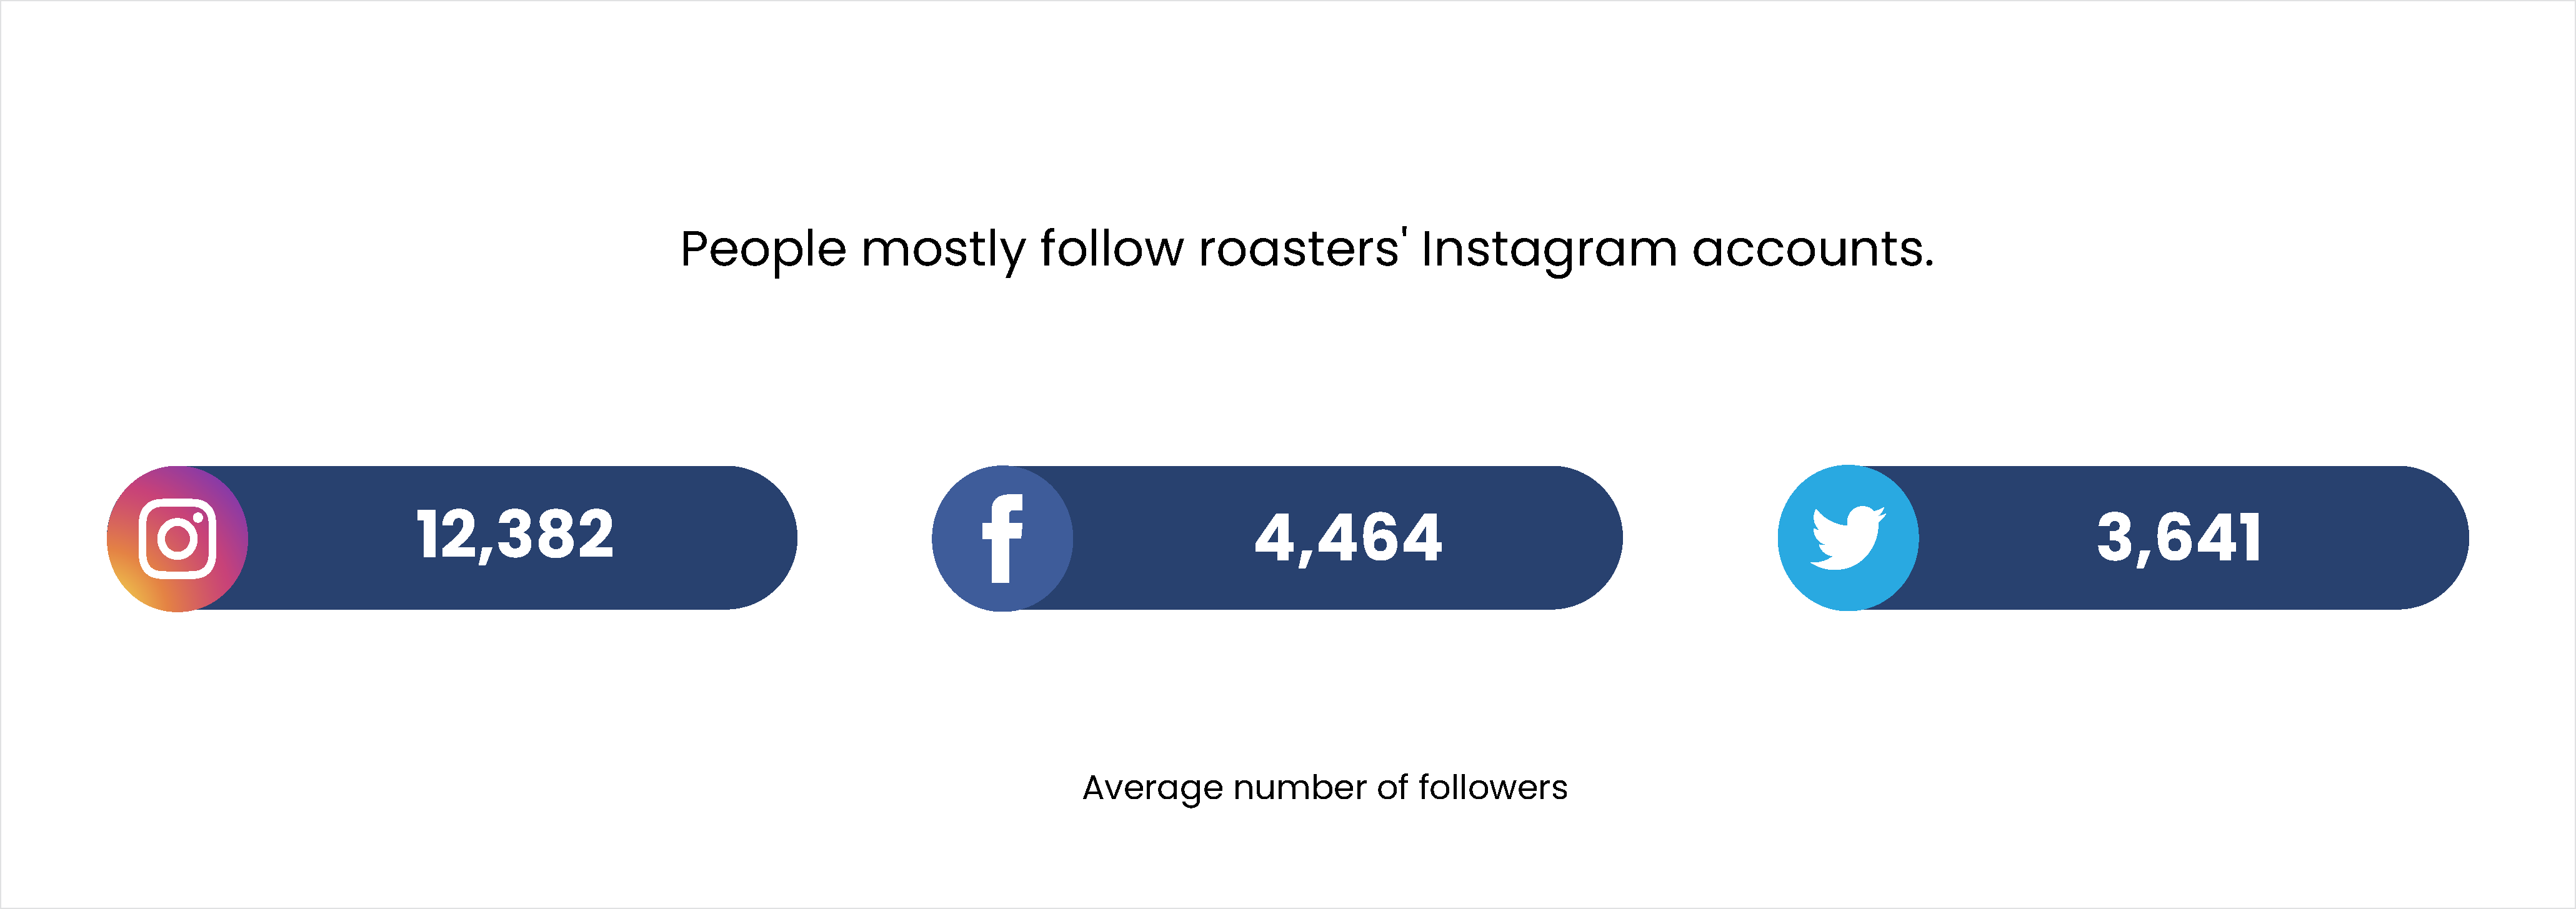 People mostly follow roasters' Instagram accounts